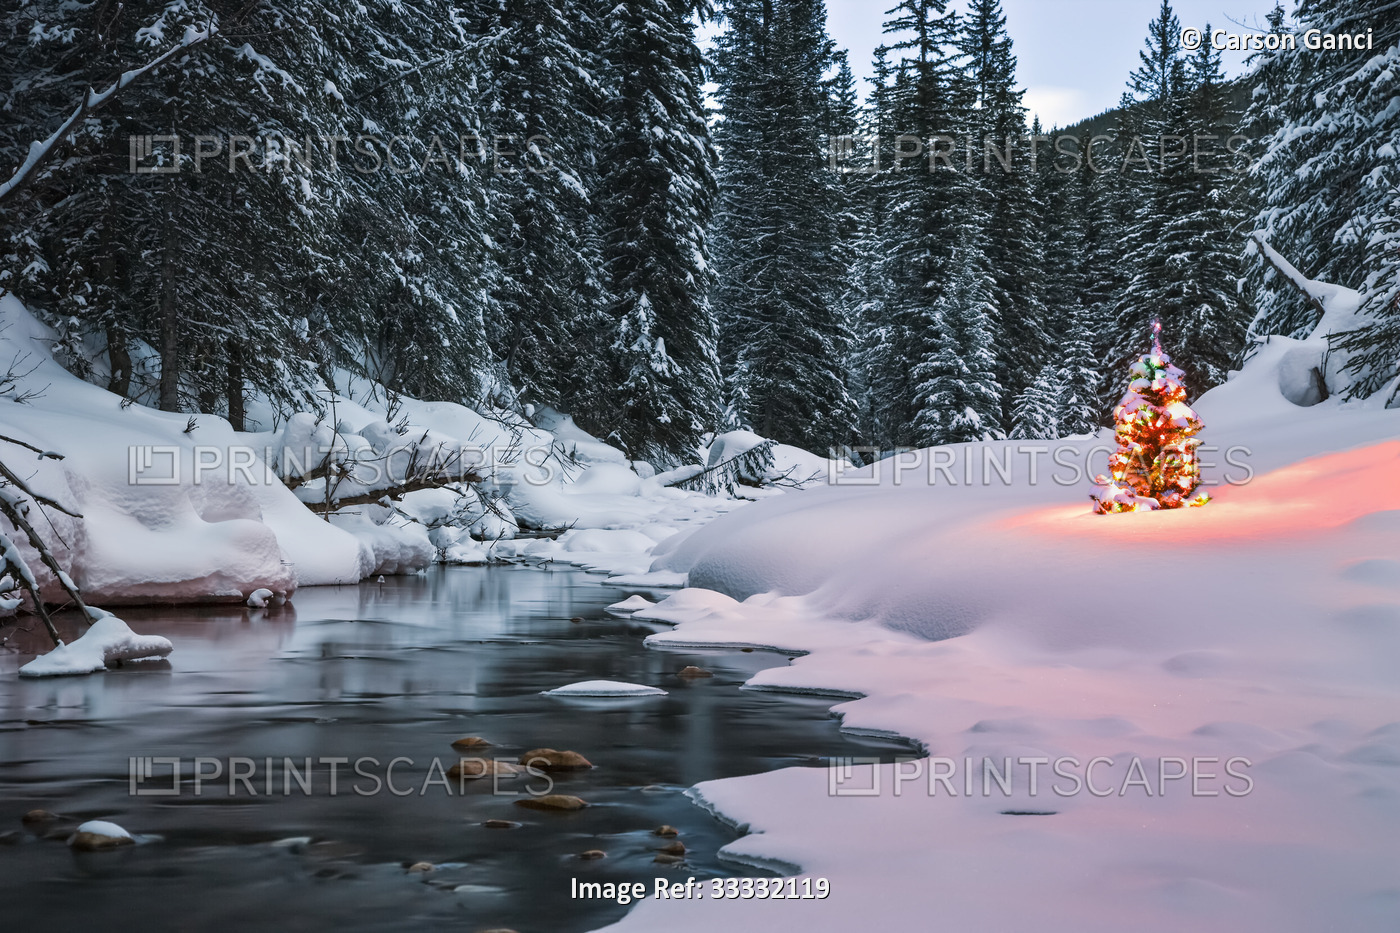 An evergreen tree is illuminated with Christmas lights on a snowy landscape by ...